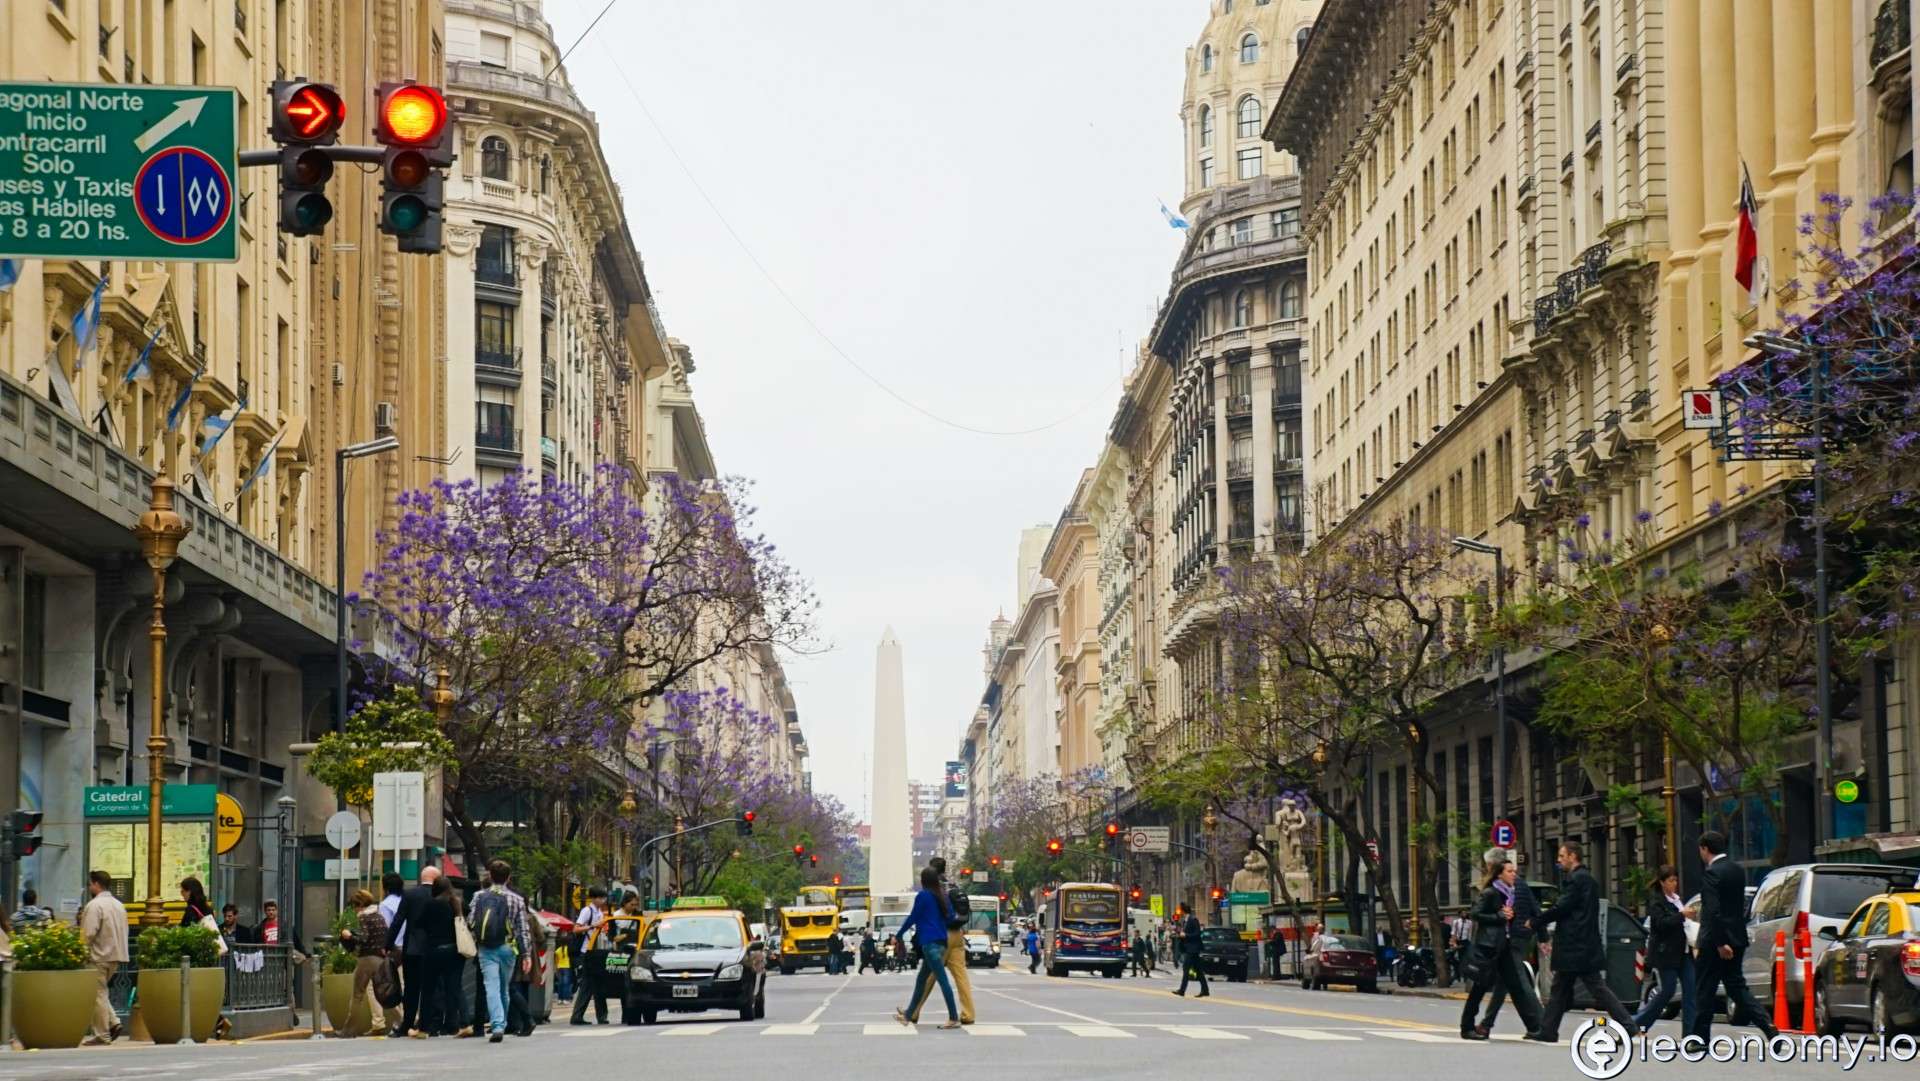 Buenos Aires has launched a campaign to attract digital nomads